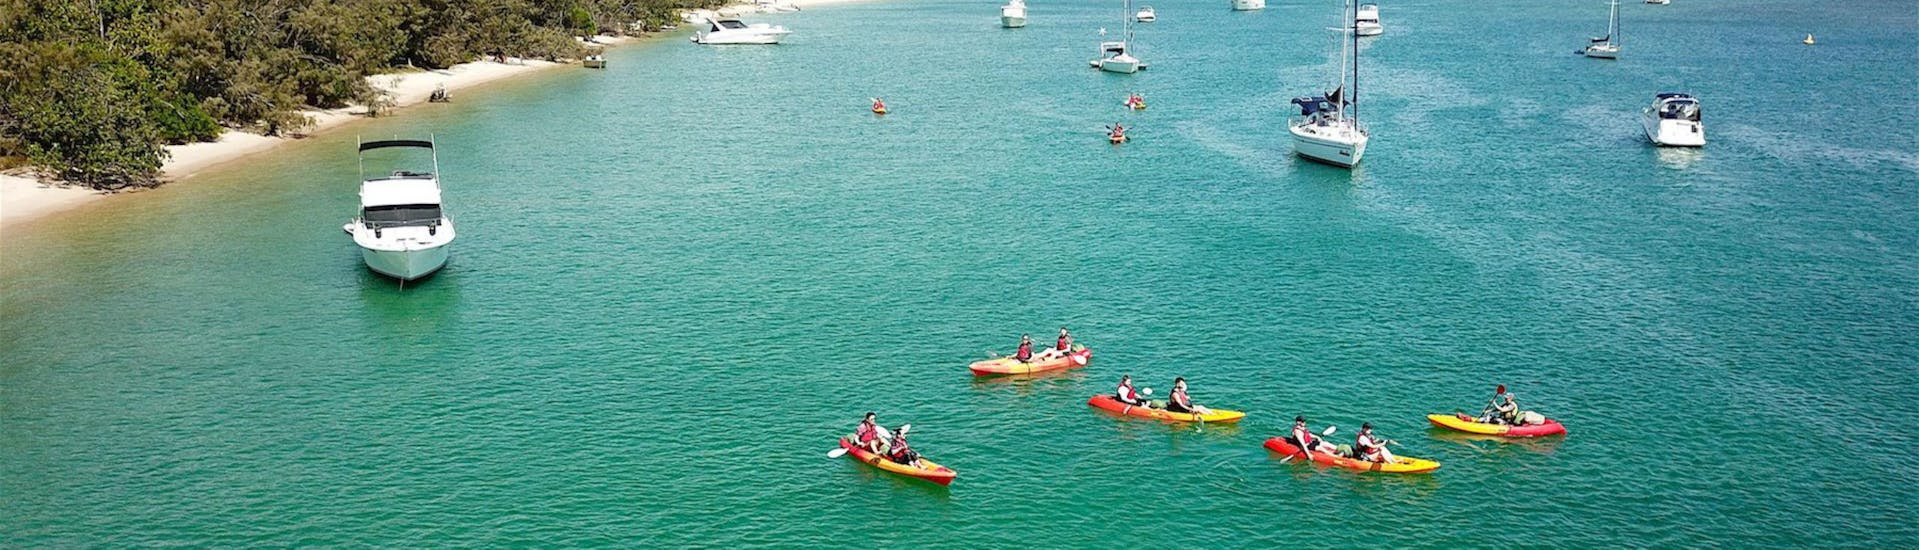 An aereal view of a group of people paddling across the broadwater during the tour Sea Kayaking in Gold Coast - 'Quick Escape' with Seaway Kayaking Tours.